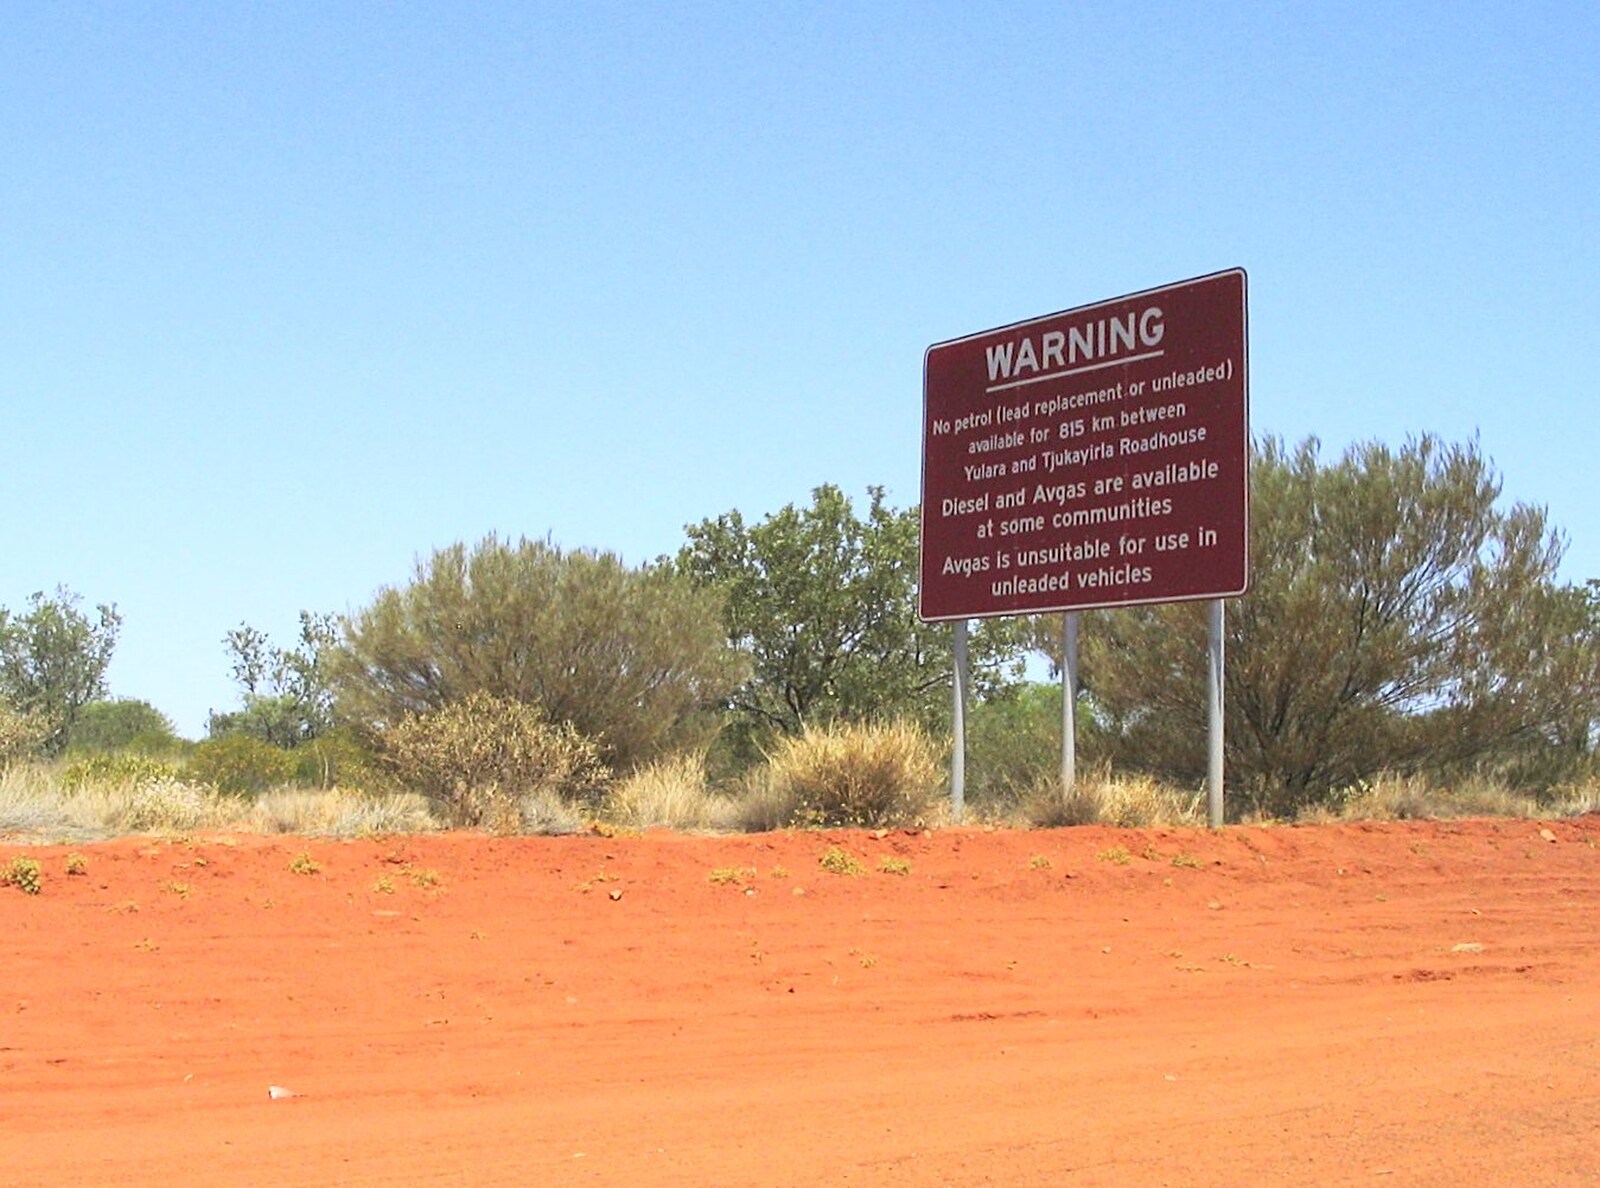 There's no o petrol for 815 kilometres (509 miles) from The Red Centre: Yulara and Uluru, Northern Territories, Australia - 8th October 2004